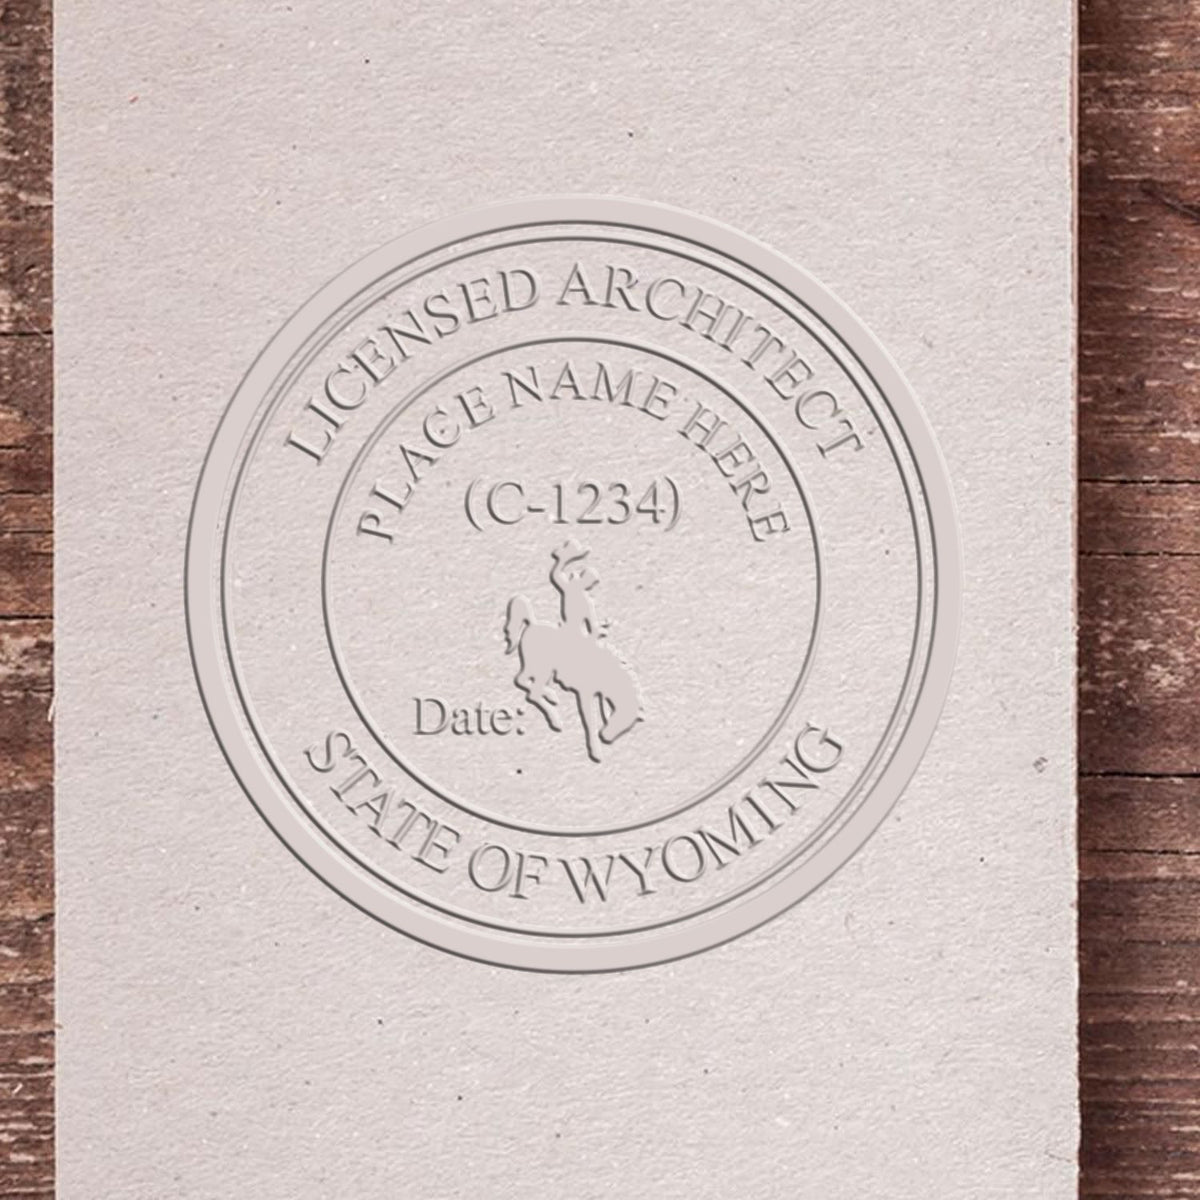 A stamped impression of the Wyoming Desk Architect Embossing Seal in this stylish lifestyle photo, setting the tone for a unique and personalized product.